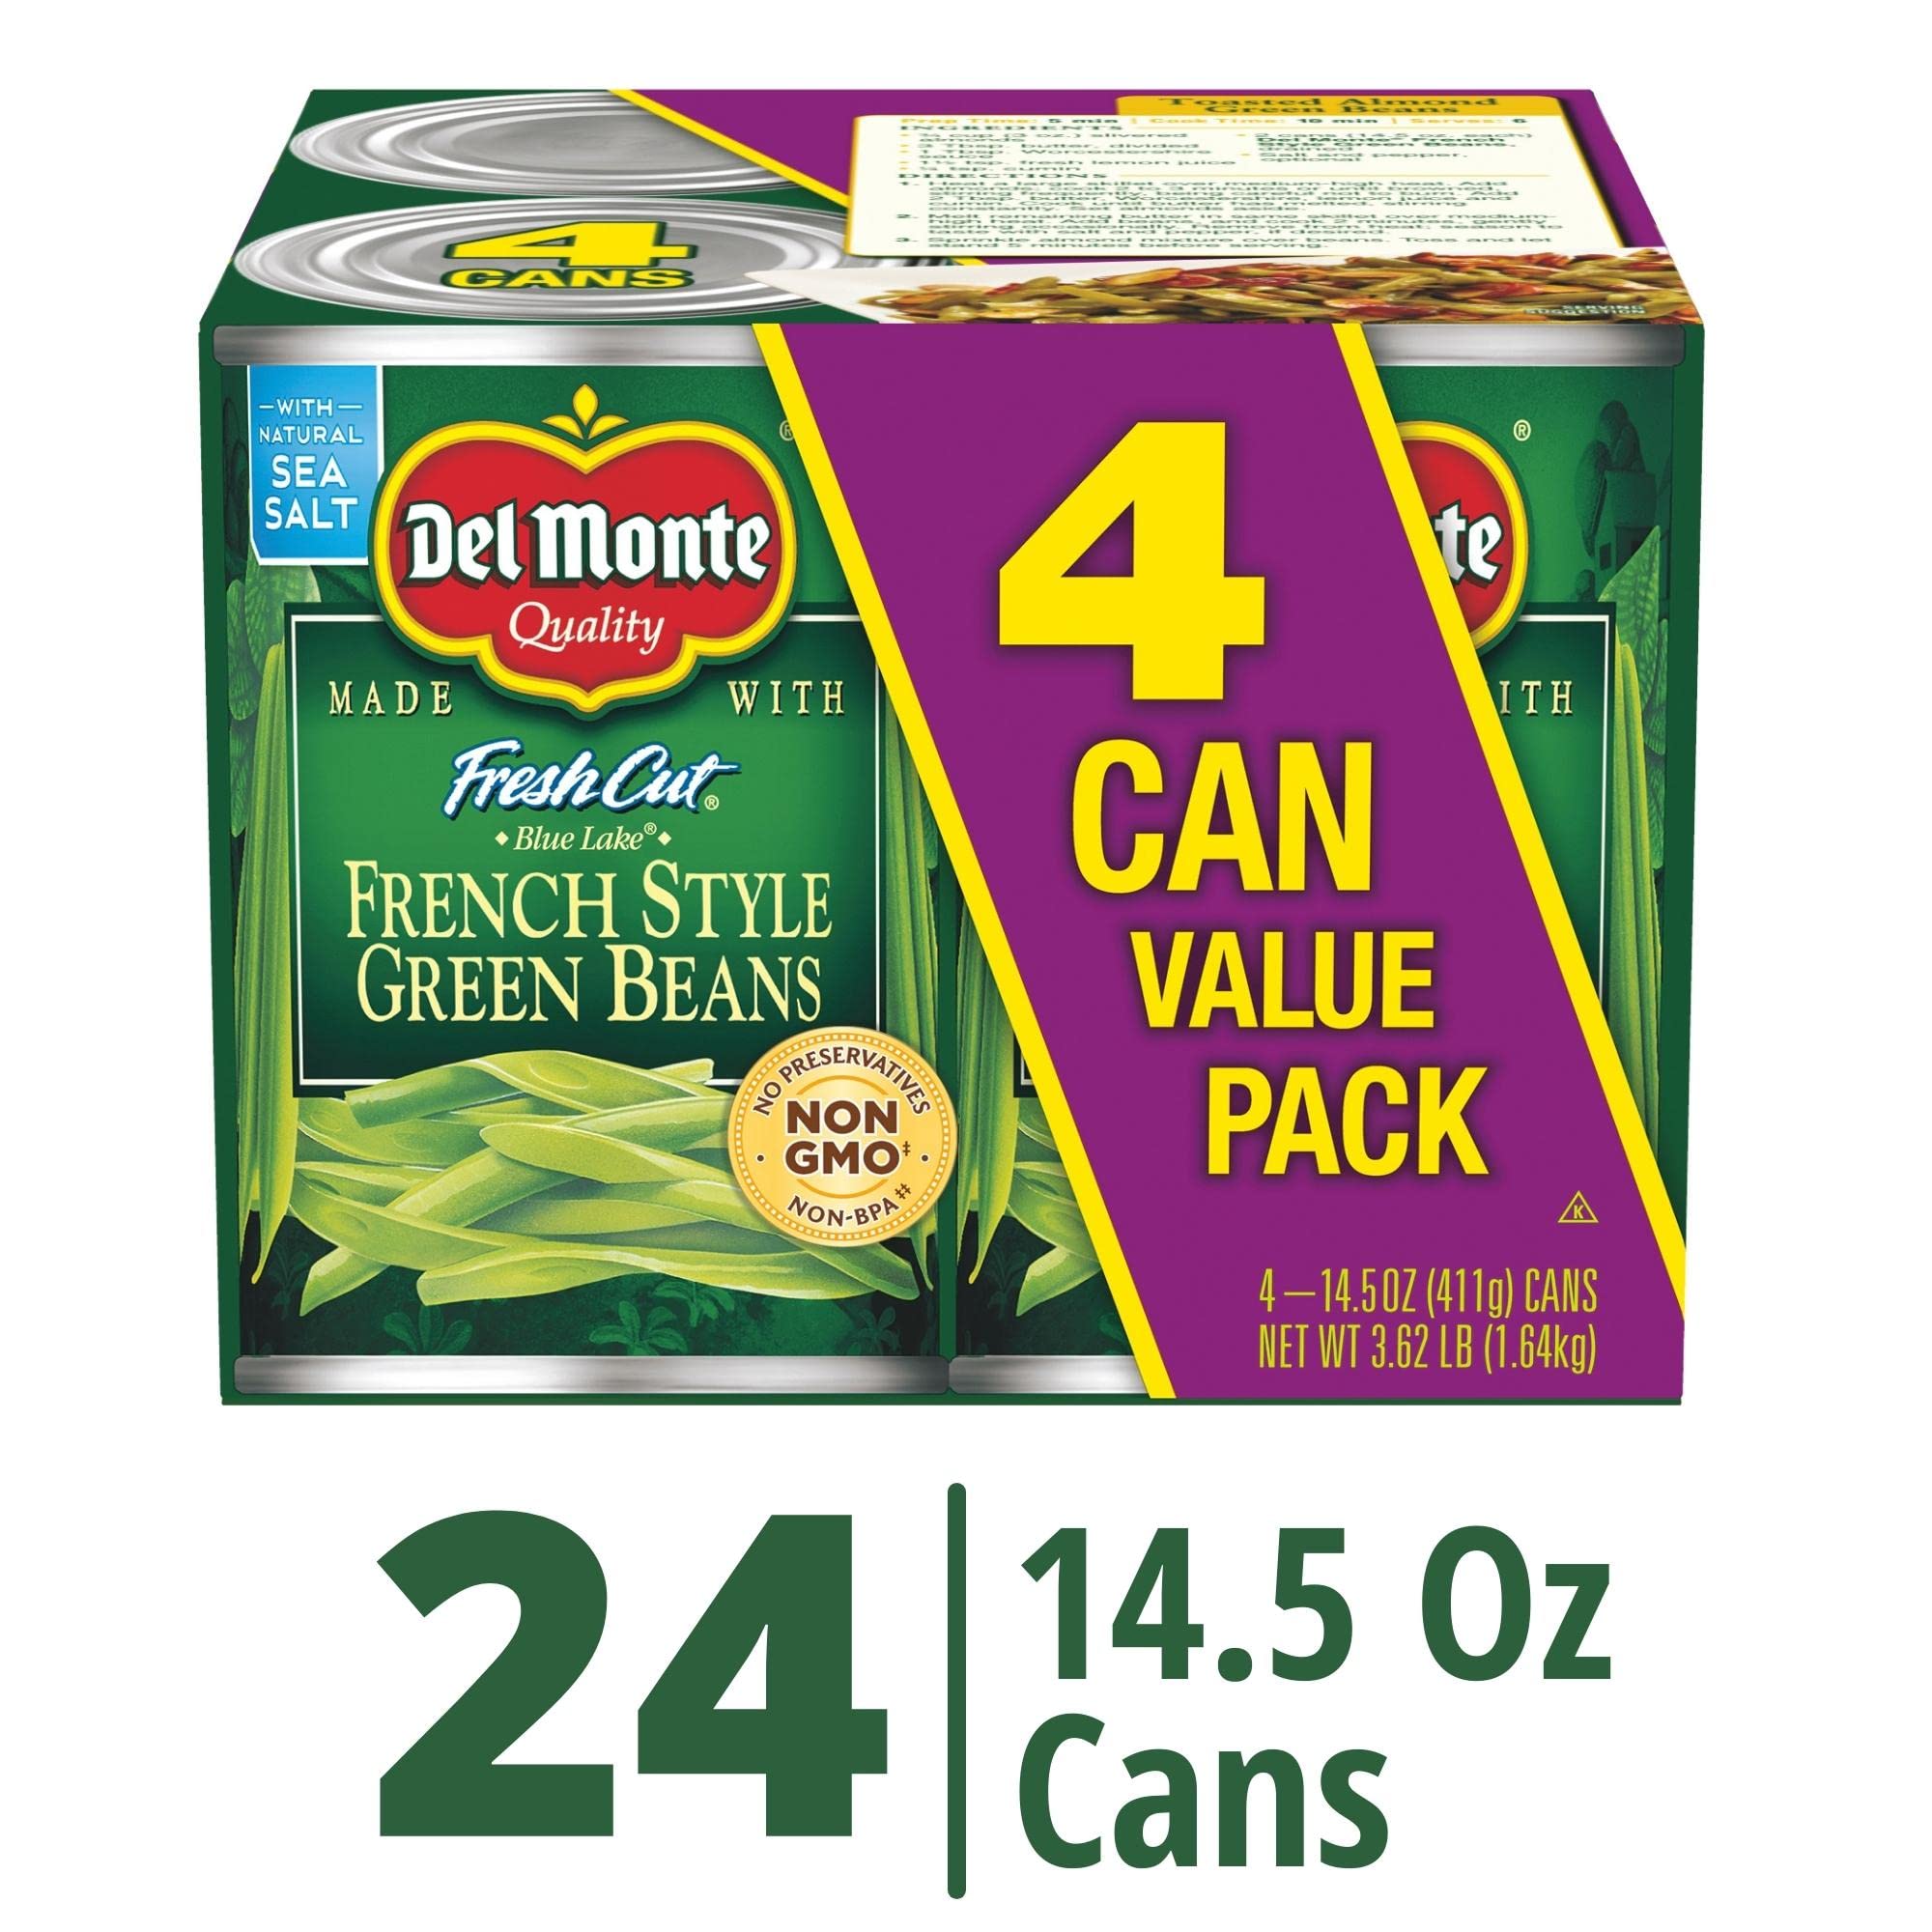 Del Monte FRESH CUT BLUE LAKE French Style Green Beans Canned Vegetables, 14.5 Ounce (Pack of 24) - $14.75 or less S&S Amazon.com